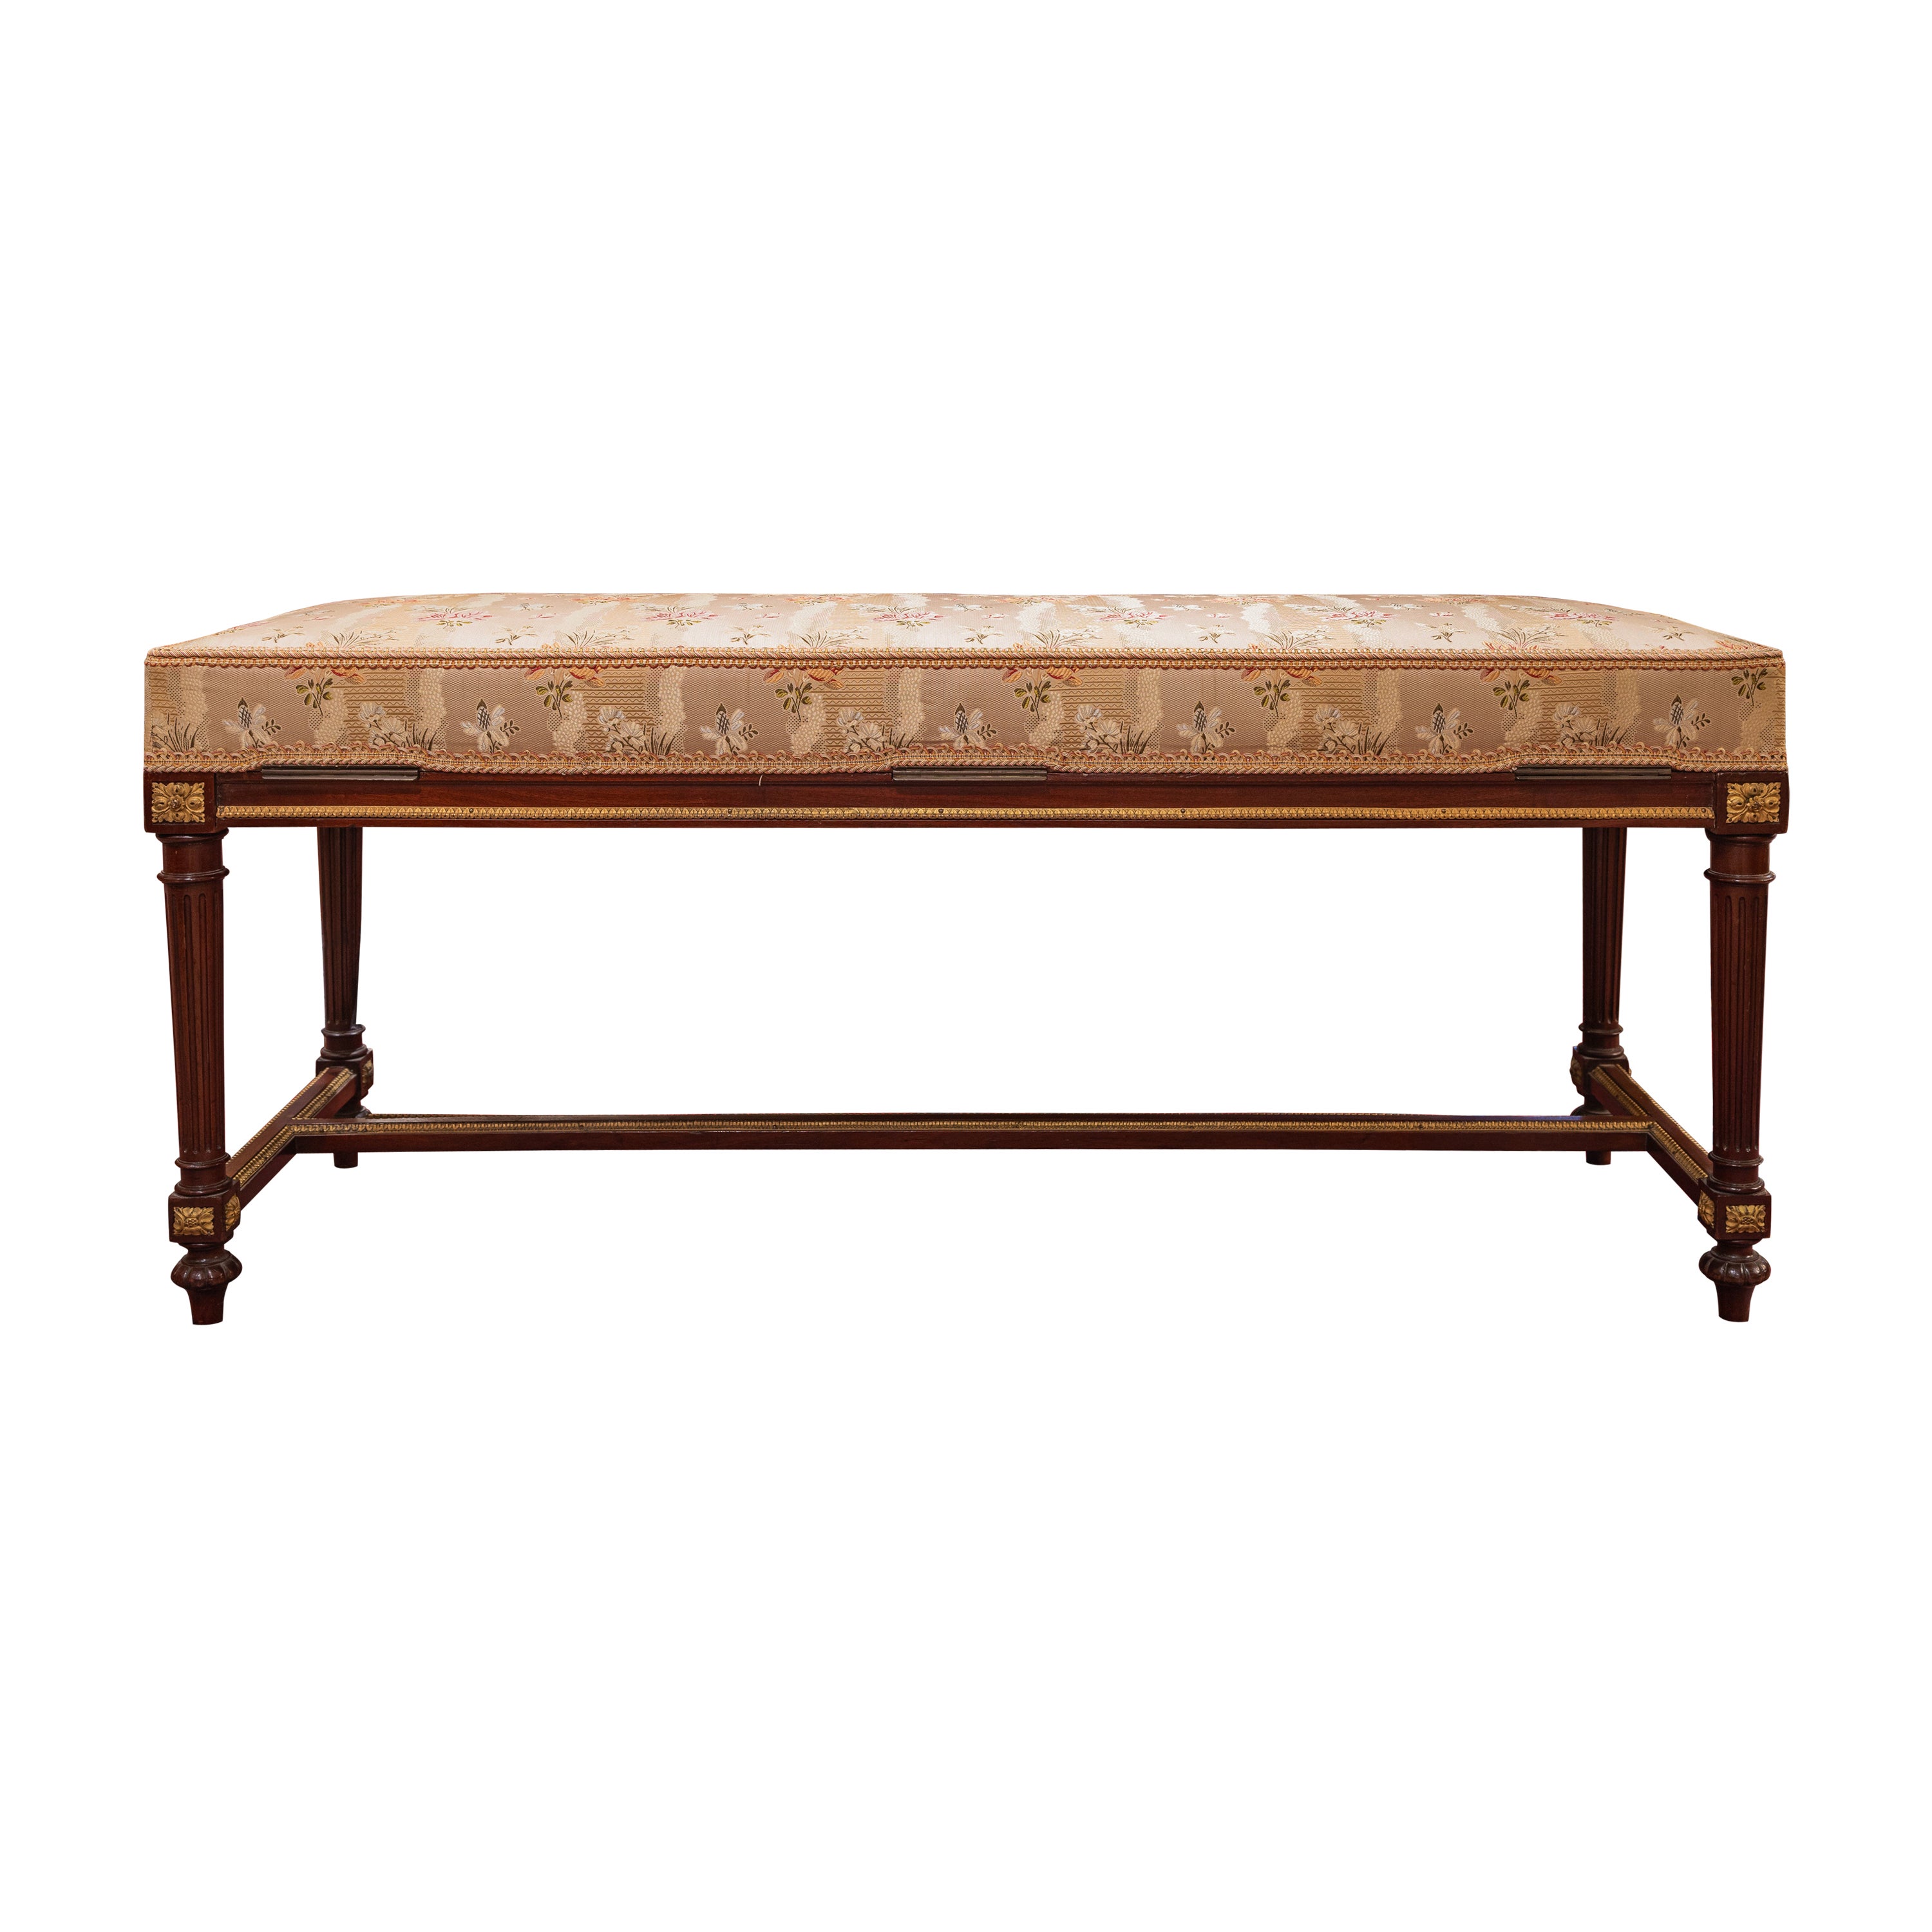 A very fine and rare 19th century Louis XVI gilt bronze mounted  bench For Sale